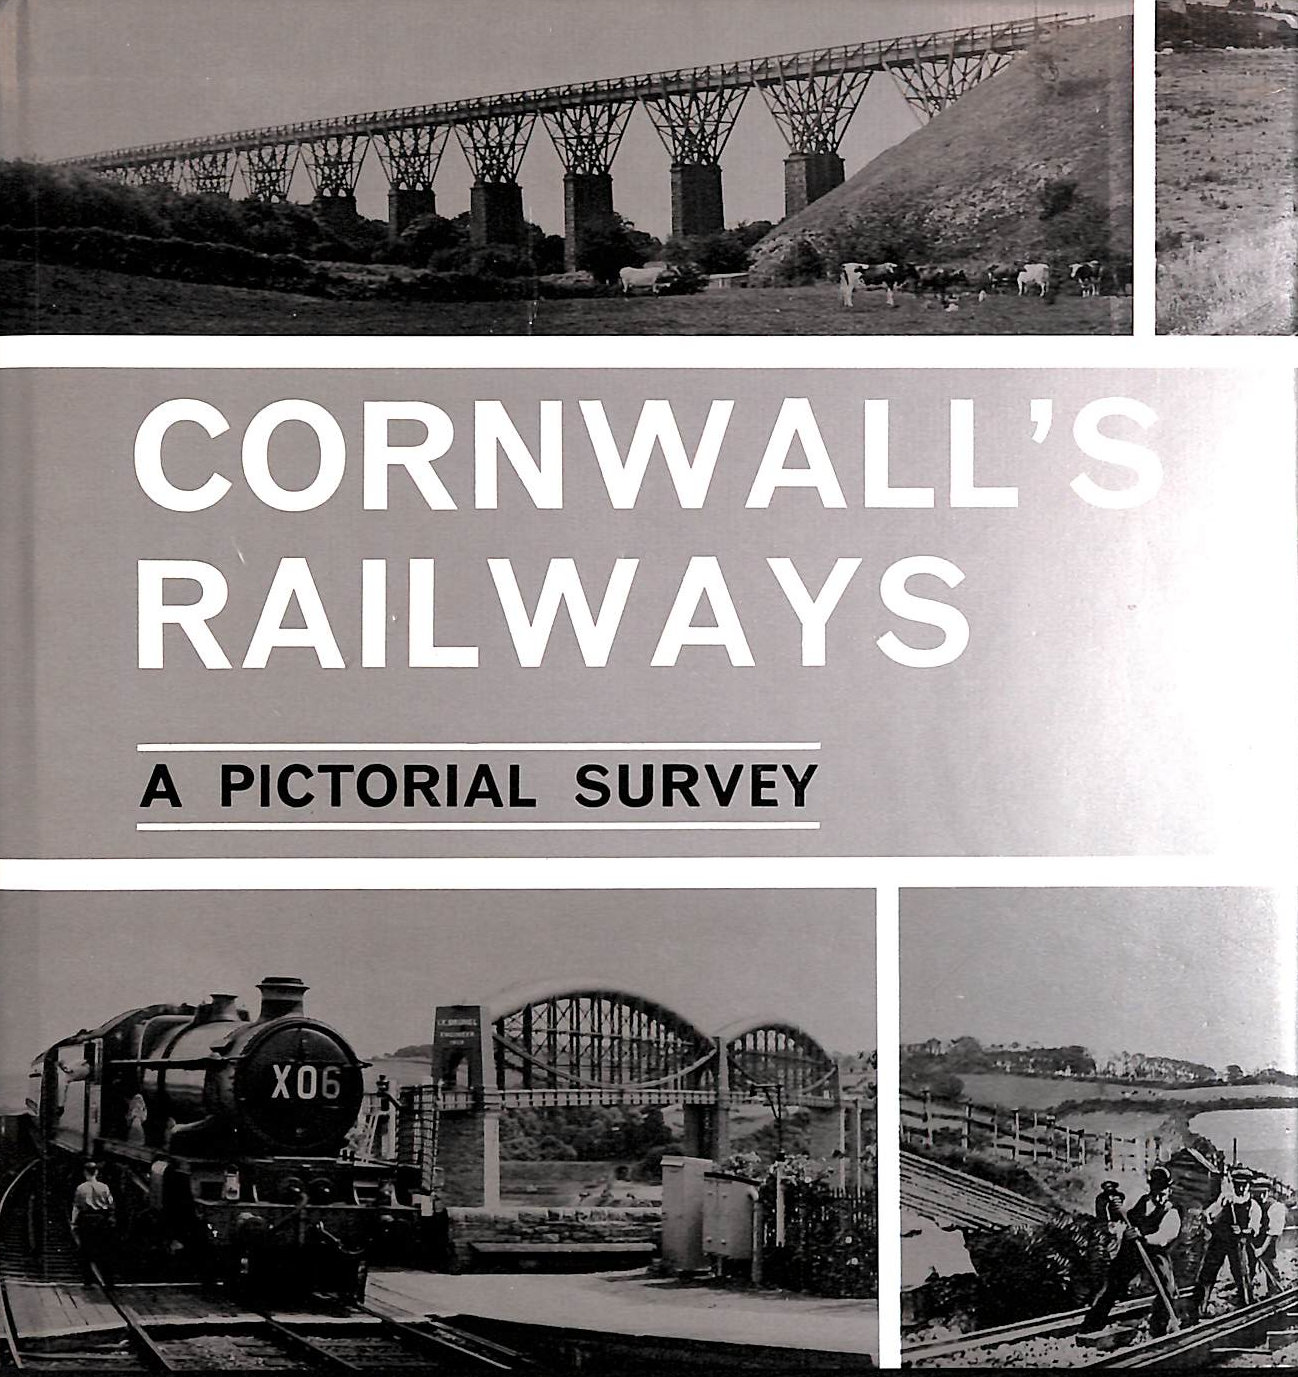 FAIRCLOUGH. ANTHONY - Cornwall's Railways - A Pictorial Survey